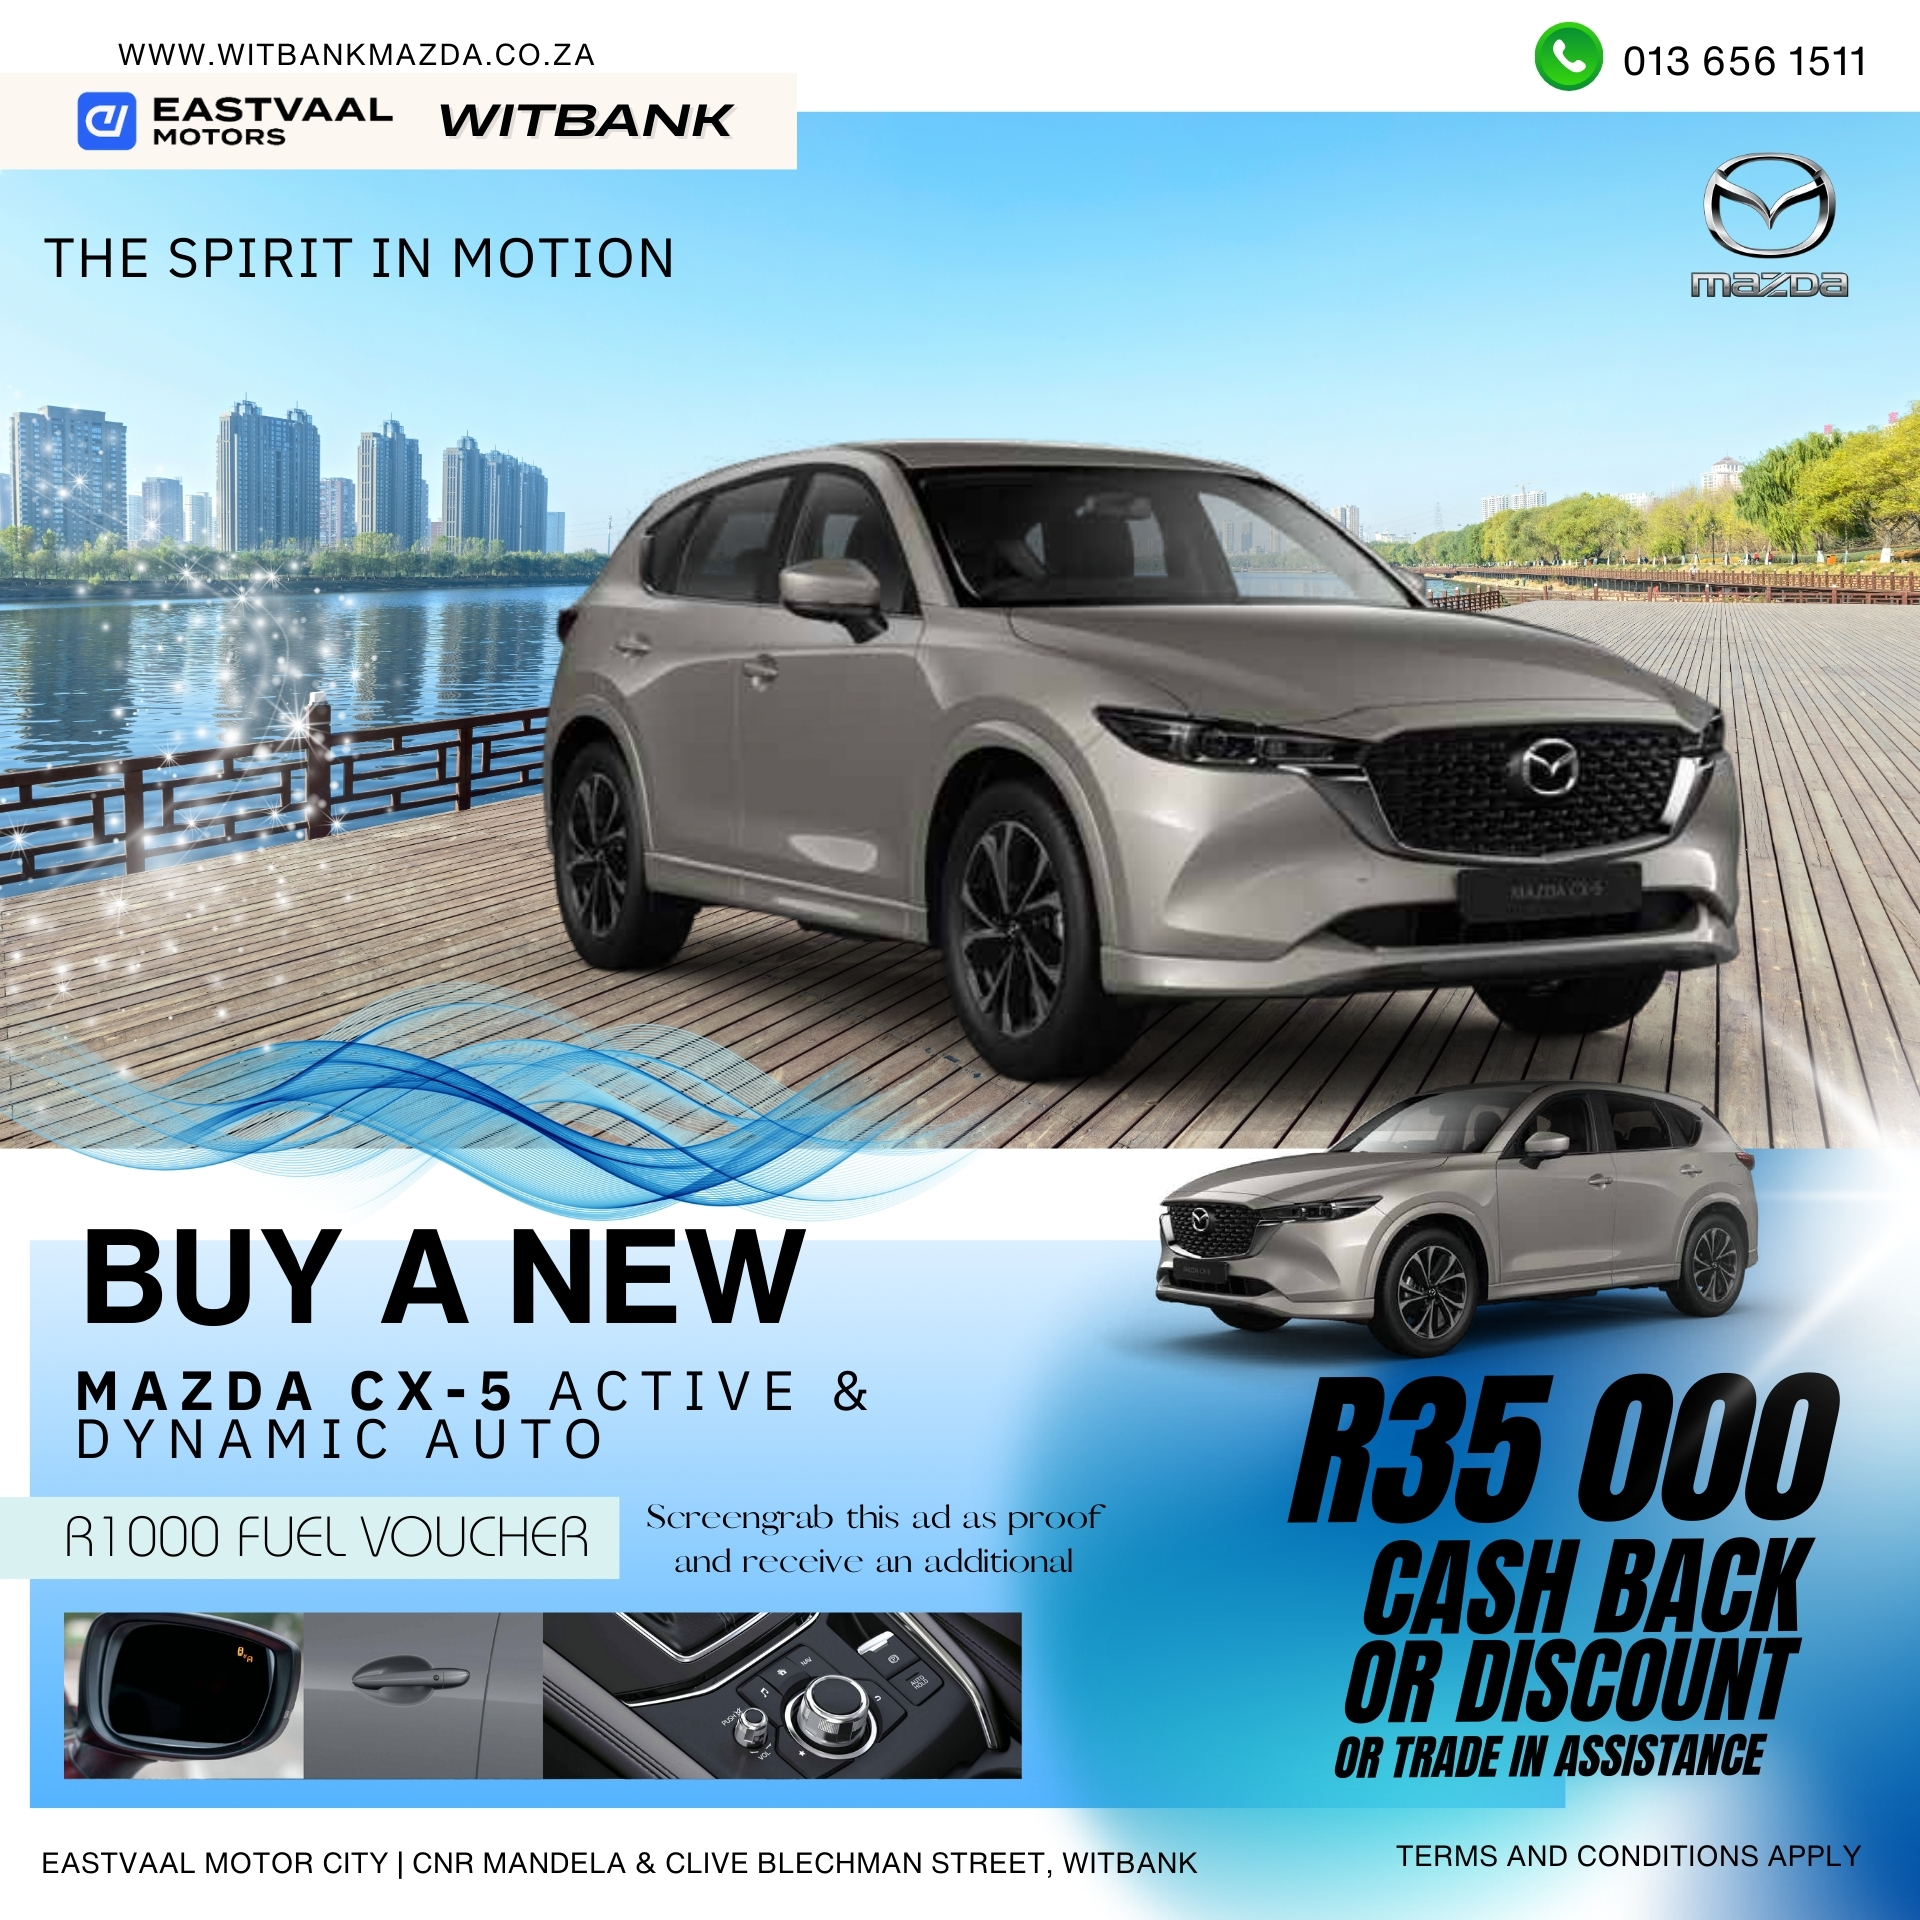 MAZDA CX-5 ACTIVE AND DYNAMIC AUTO image from Eastvaal Motors